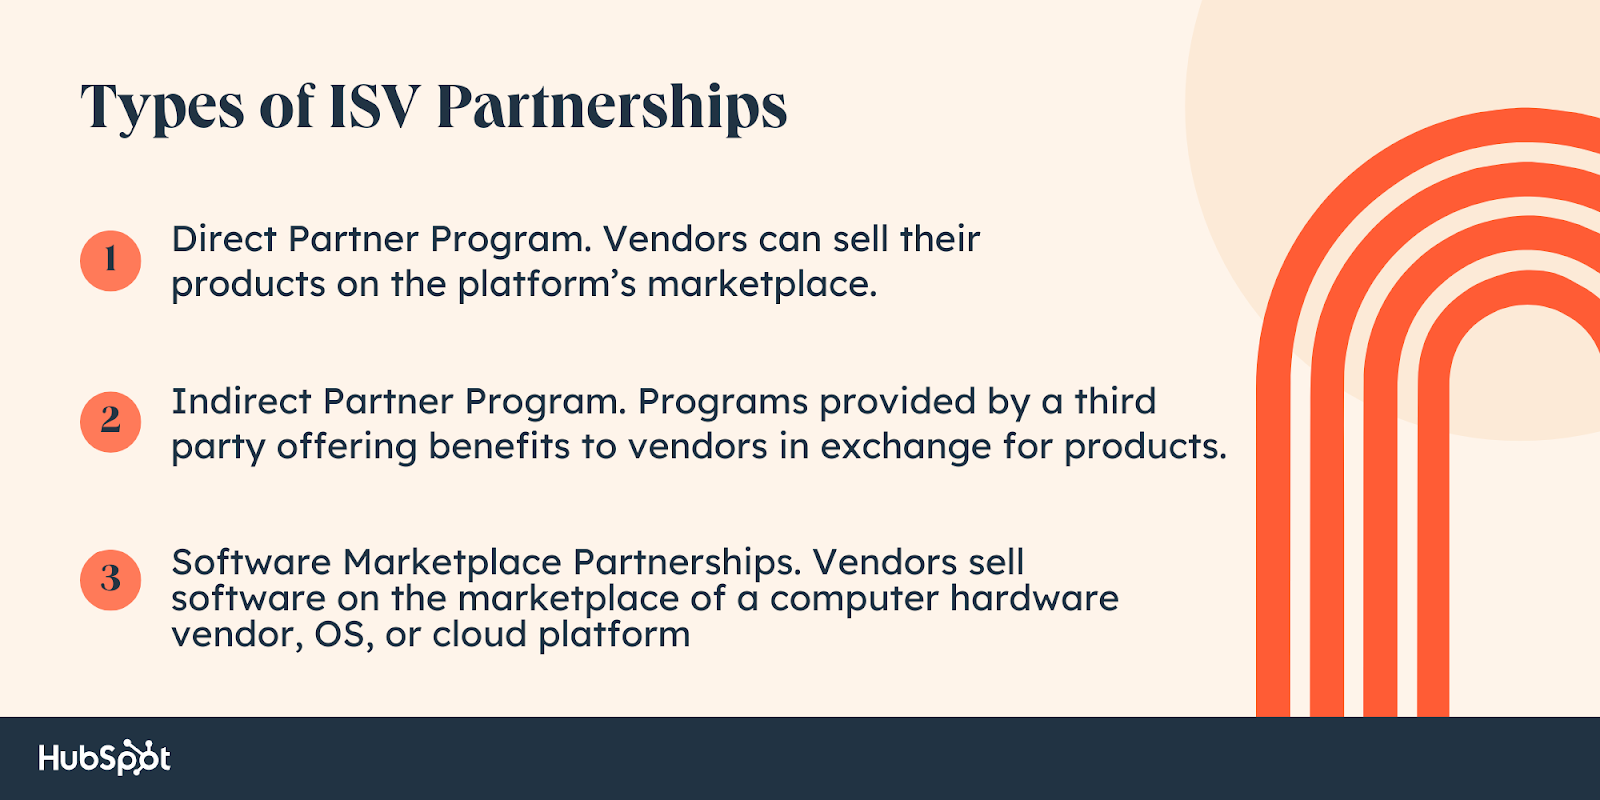 ISV Partnership Types.  Direct Partner Program.  Sellers can sell their products on the platform's marketplace.  Indirect Partner Program.  Programs provided by third parties that provide benefits to sellers in exchange for products.  Software Marketplace Partnership.  Vendors sell software on the marketplace of a computer hardware vendor, OS, or cloud platform.